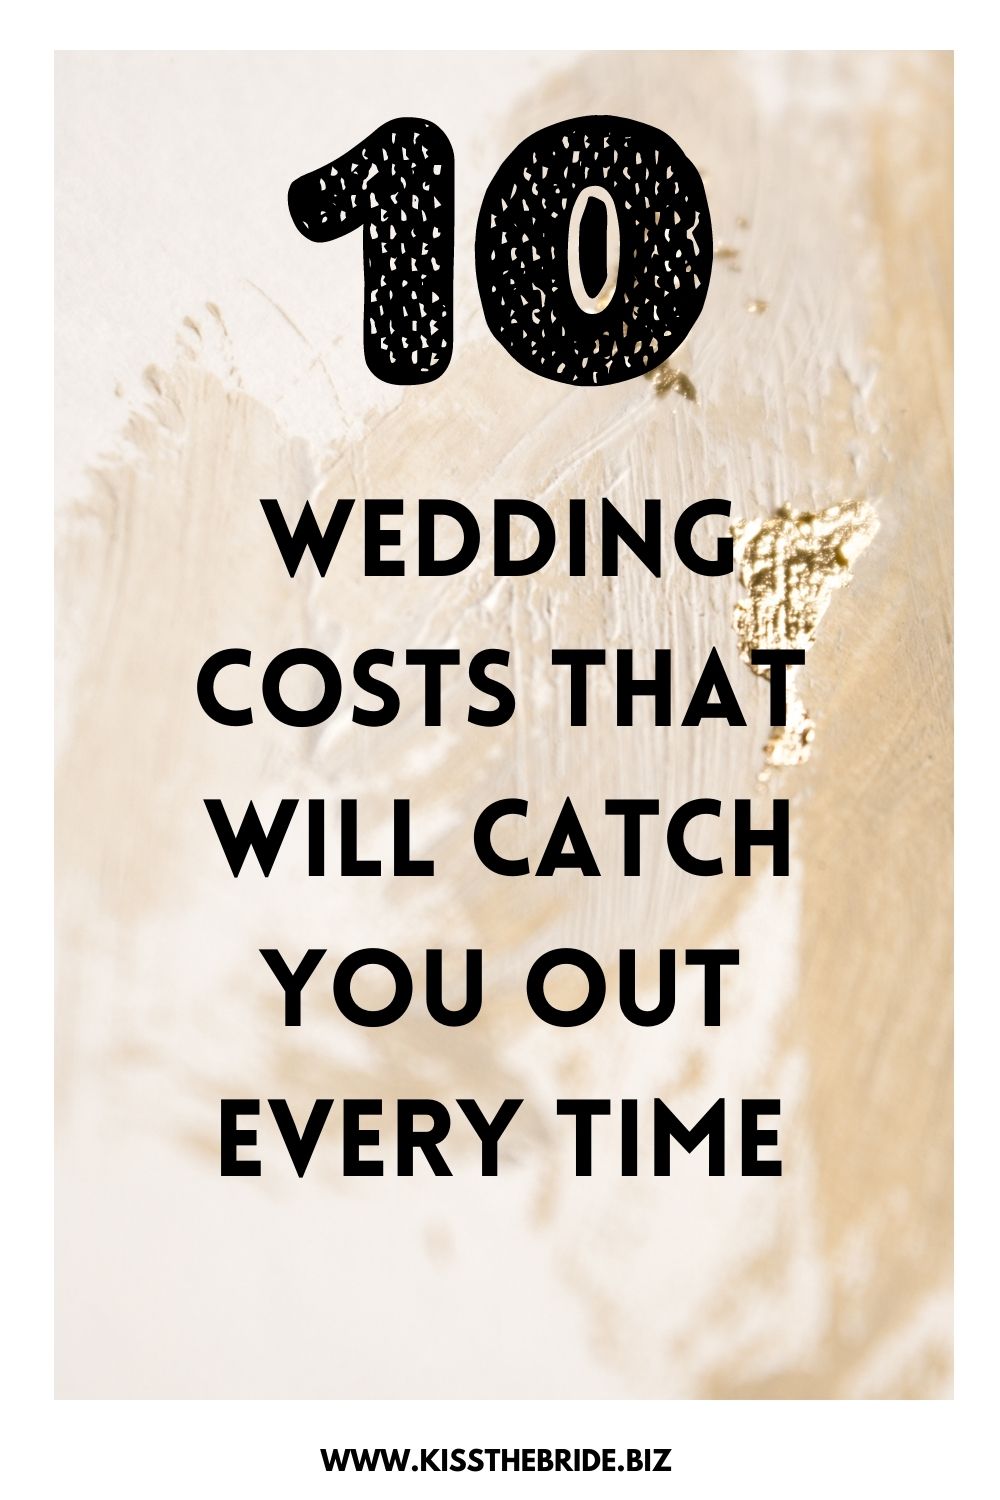 Wedding Costs that will catch you out